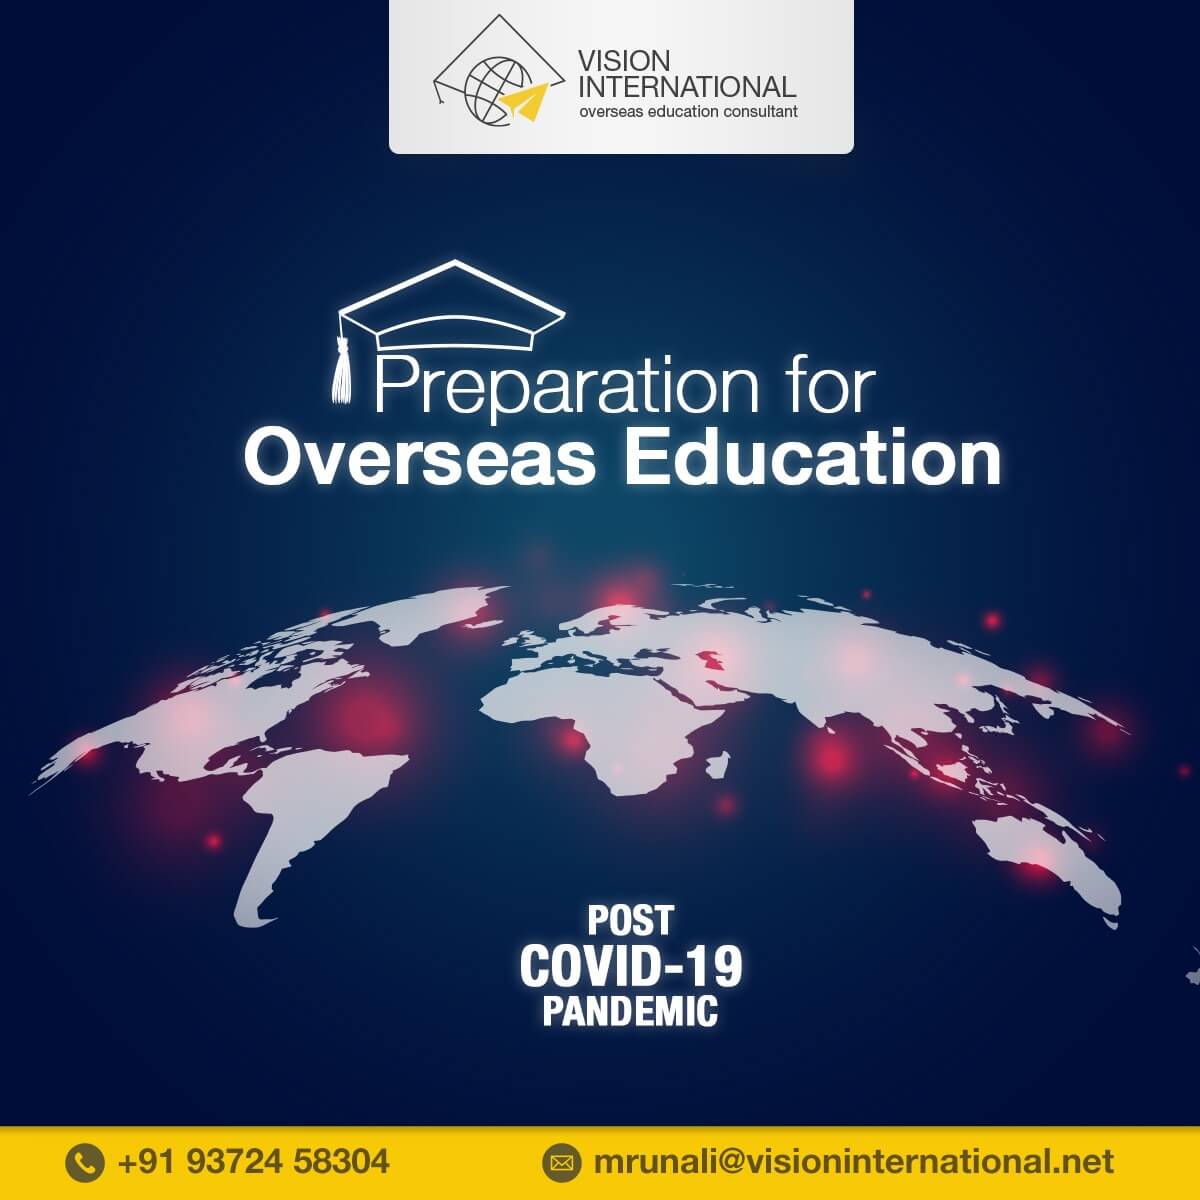 Preparation for overseas education post-Covid-19 Pandemic